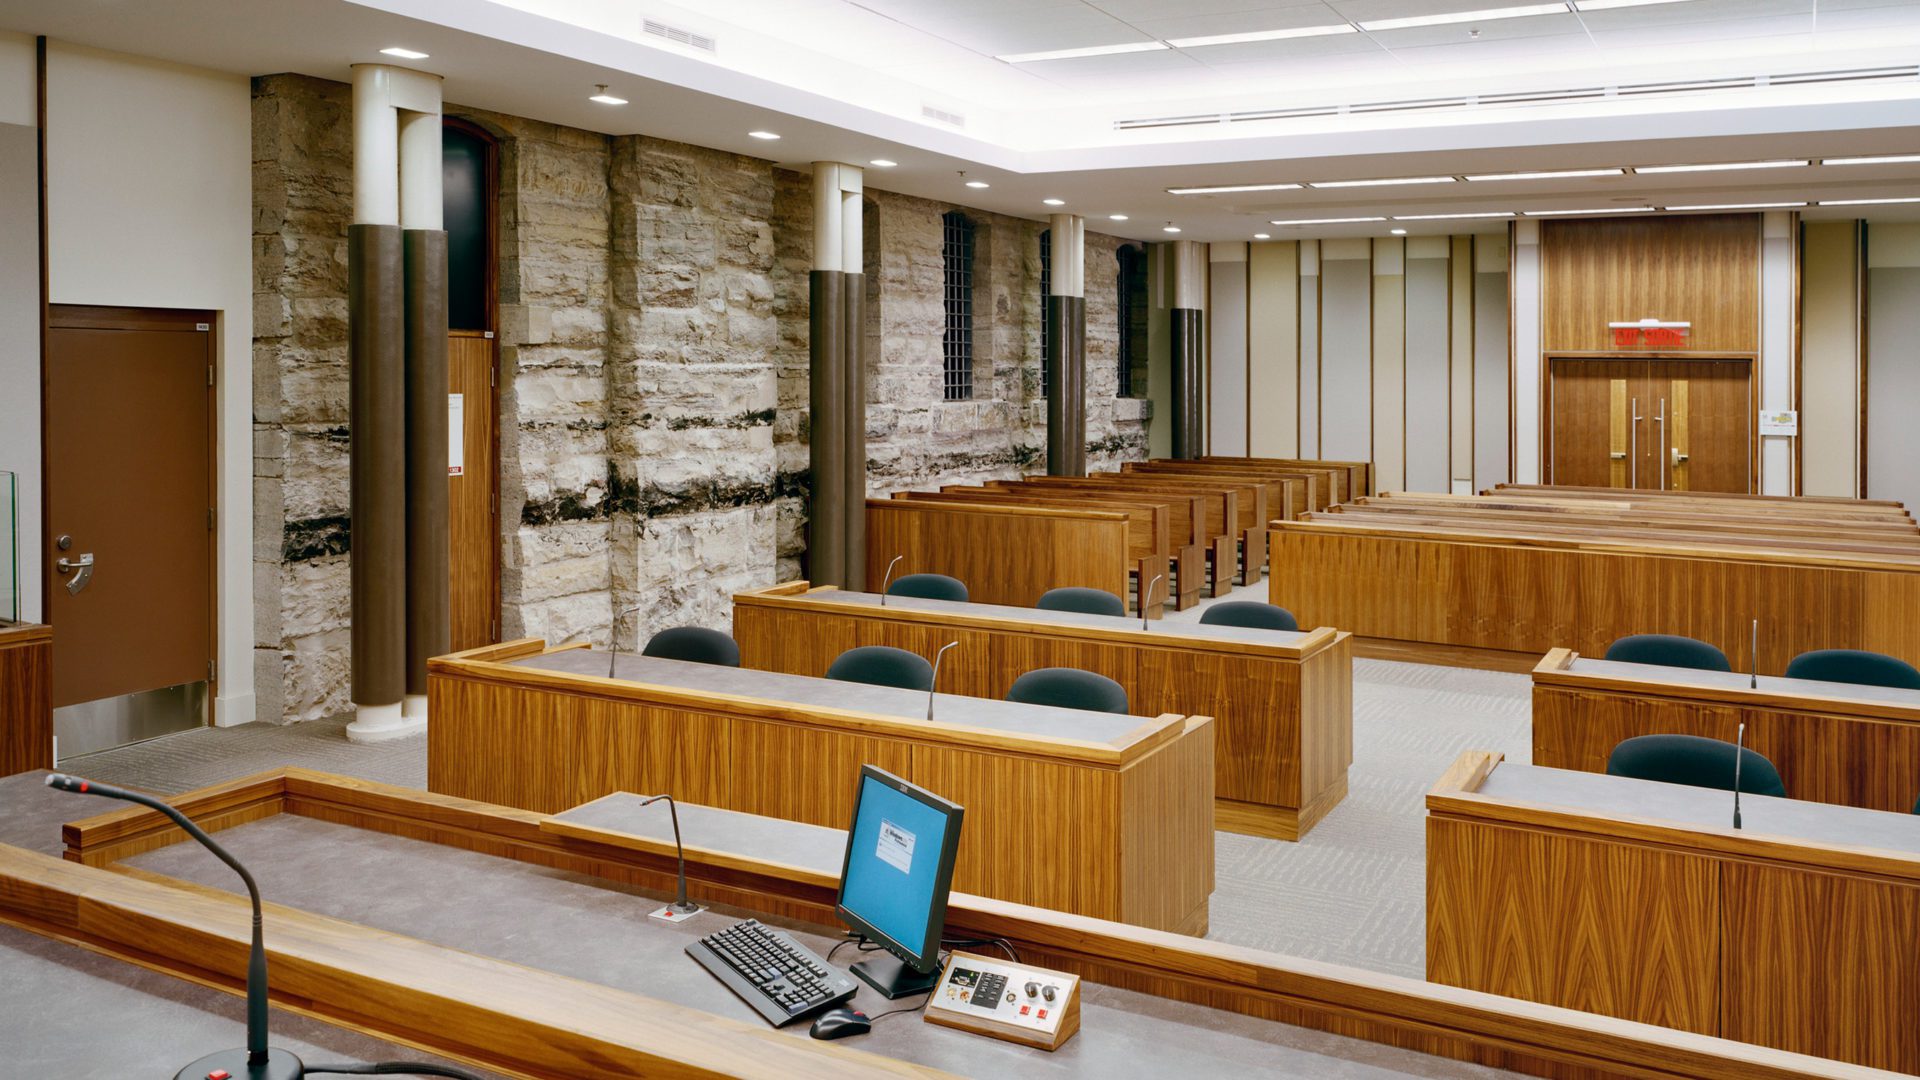 renfrew country courthouse interior courtroom